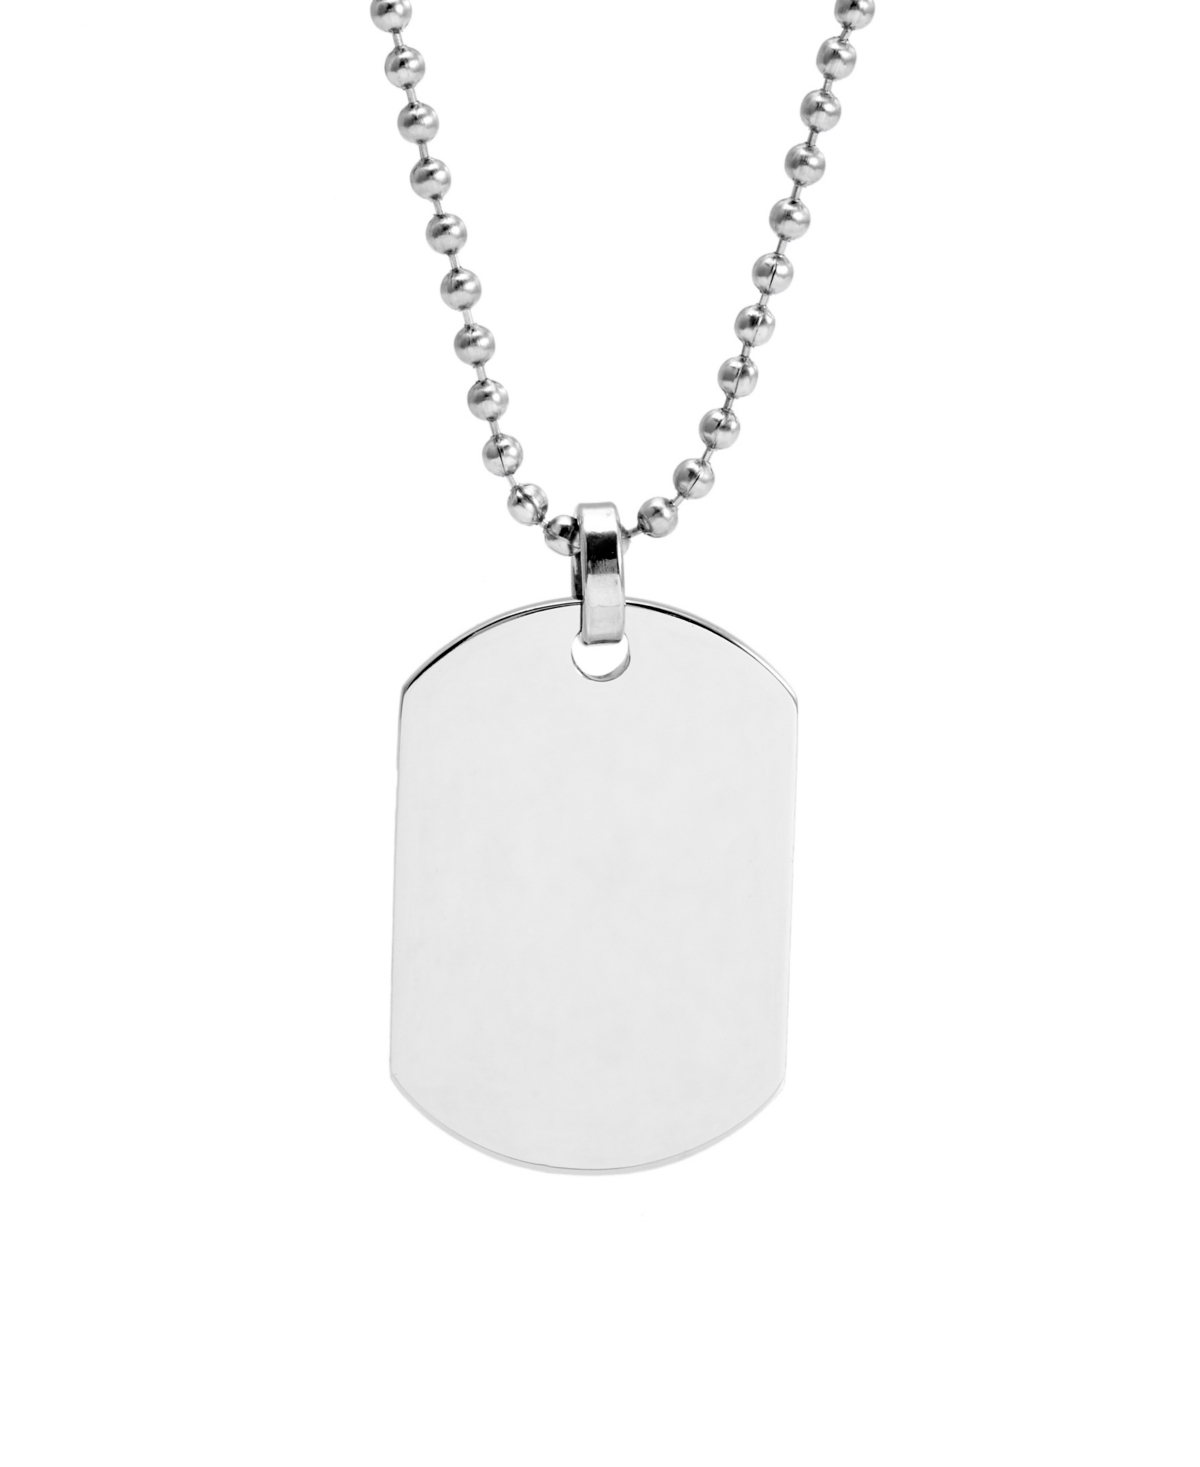 Eve's Jewelry Men's Small Stainless Steel Dog Tag Necklace